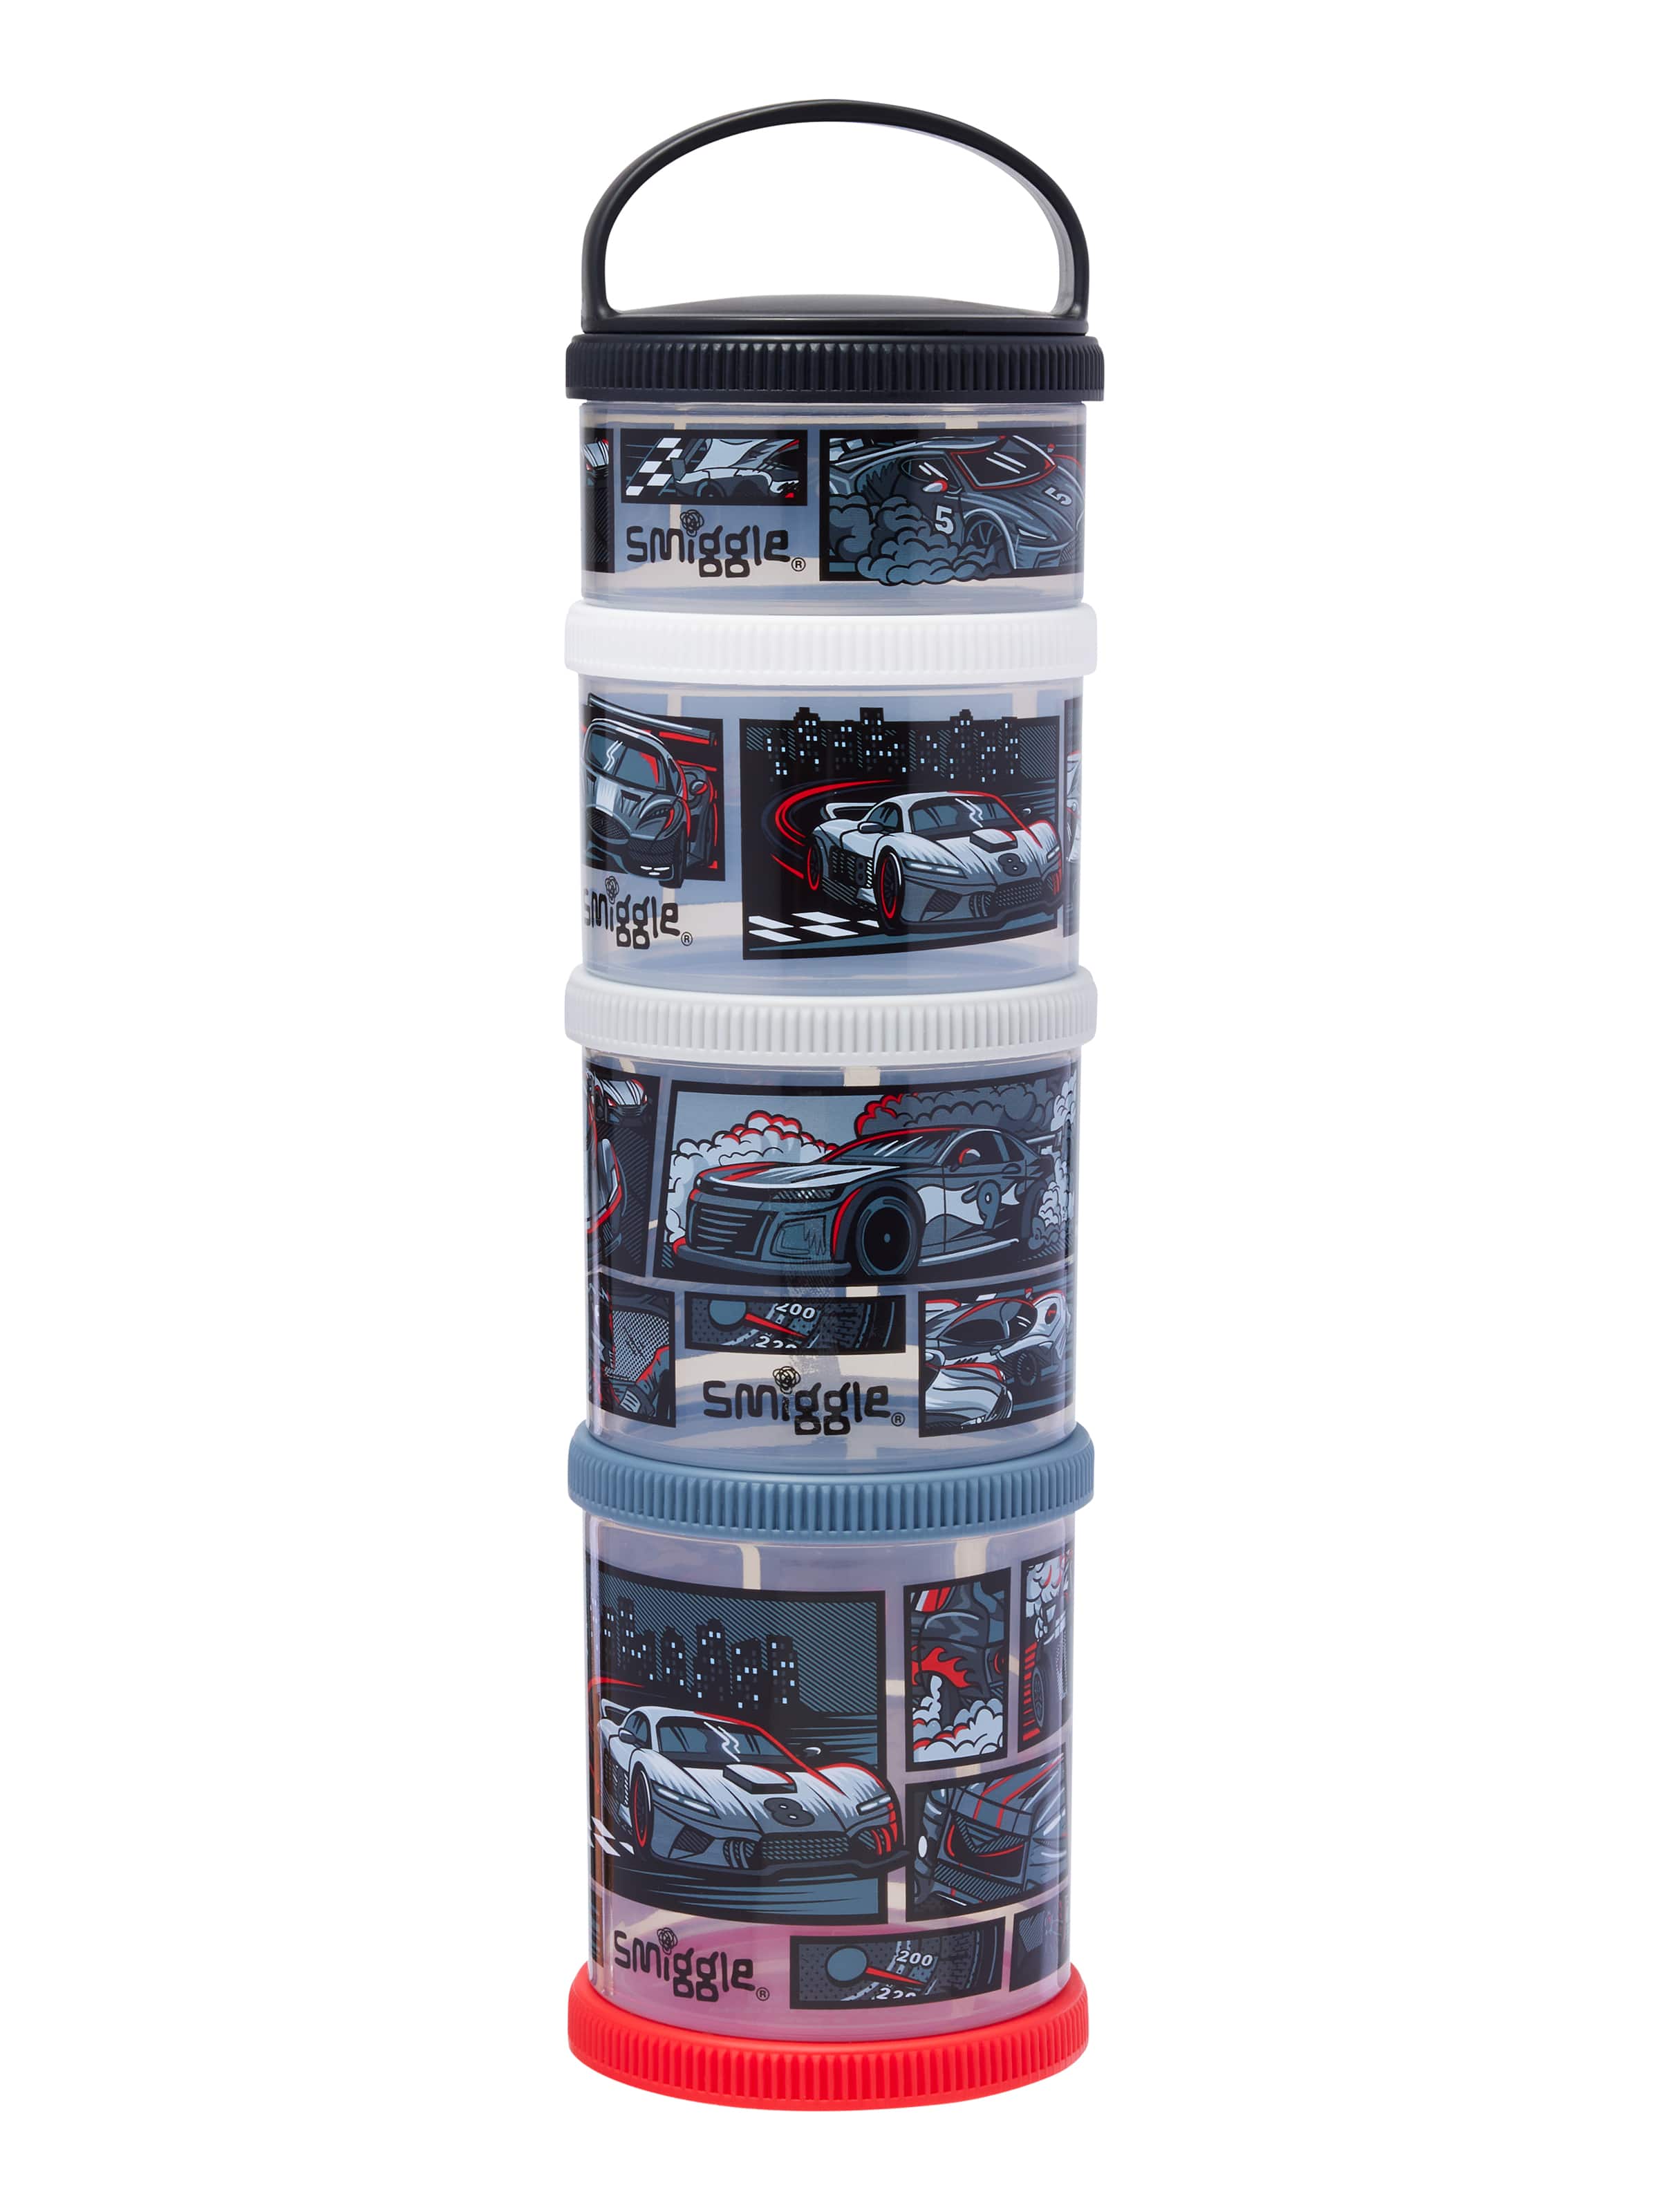 Limitless Large Snack & Stack Containers